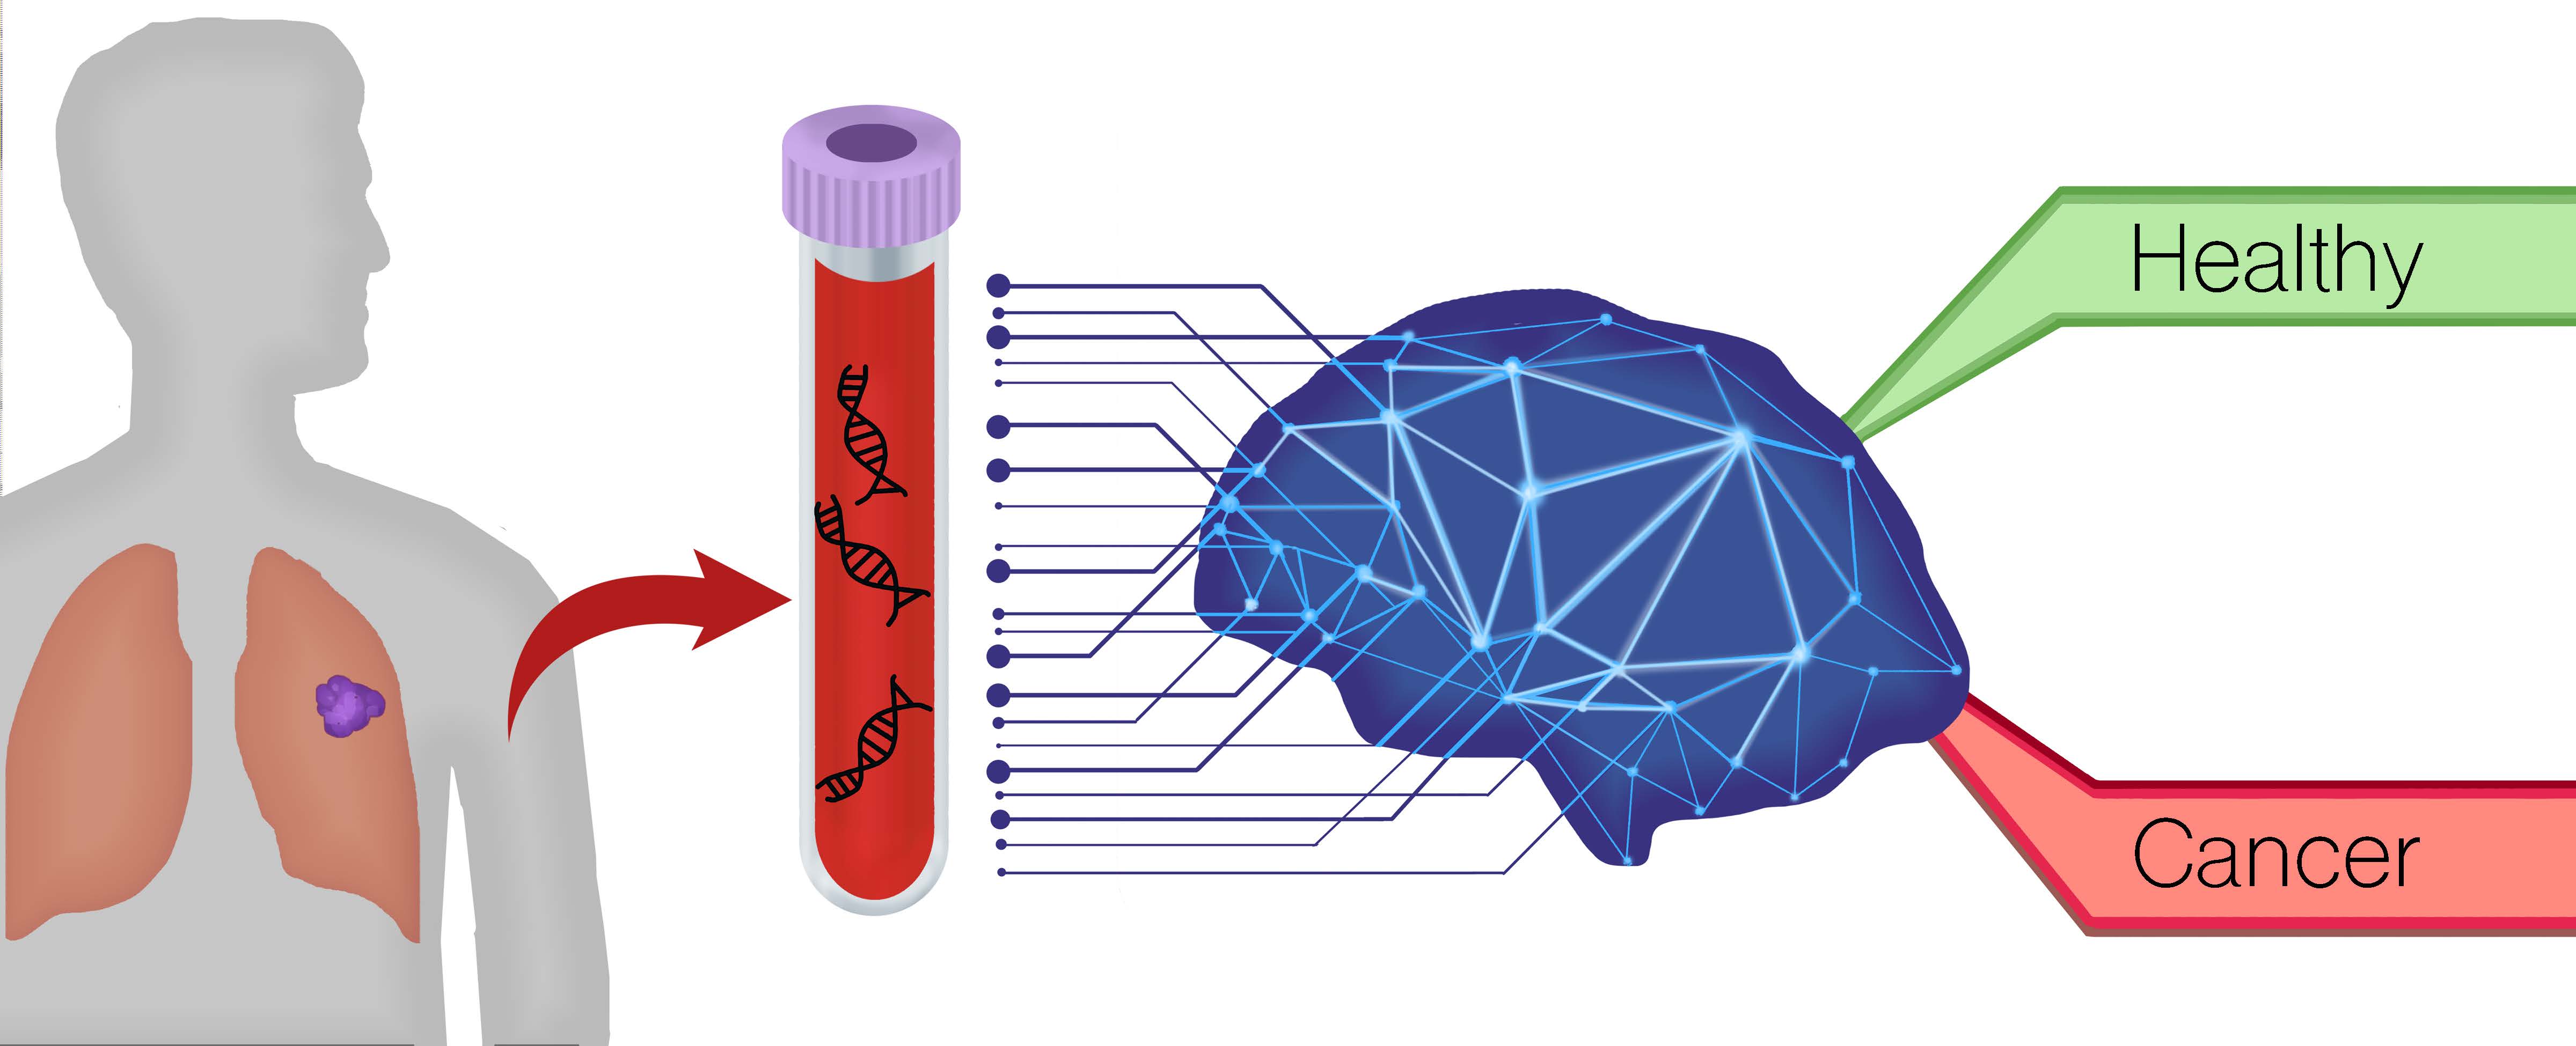 AI blood test could speed up diagnosis of brain tumours, say